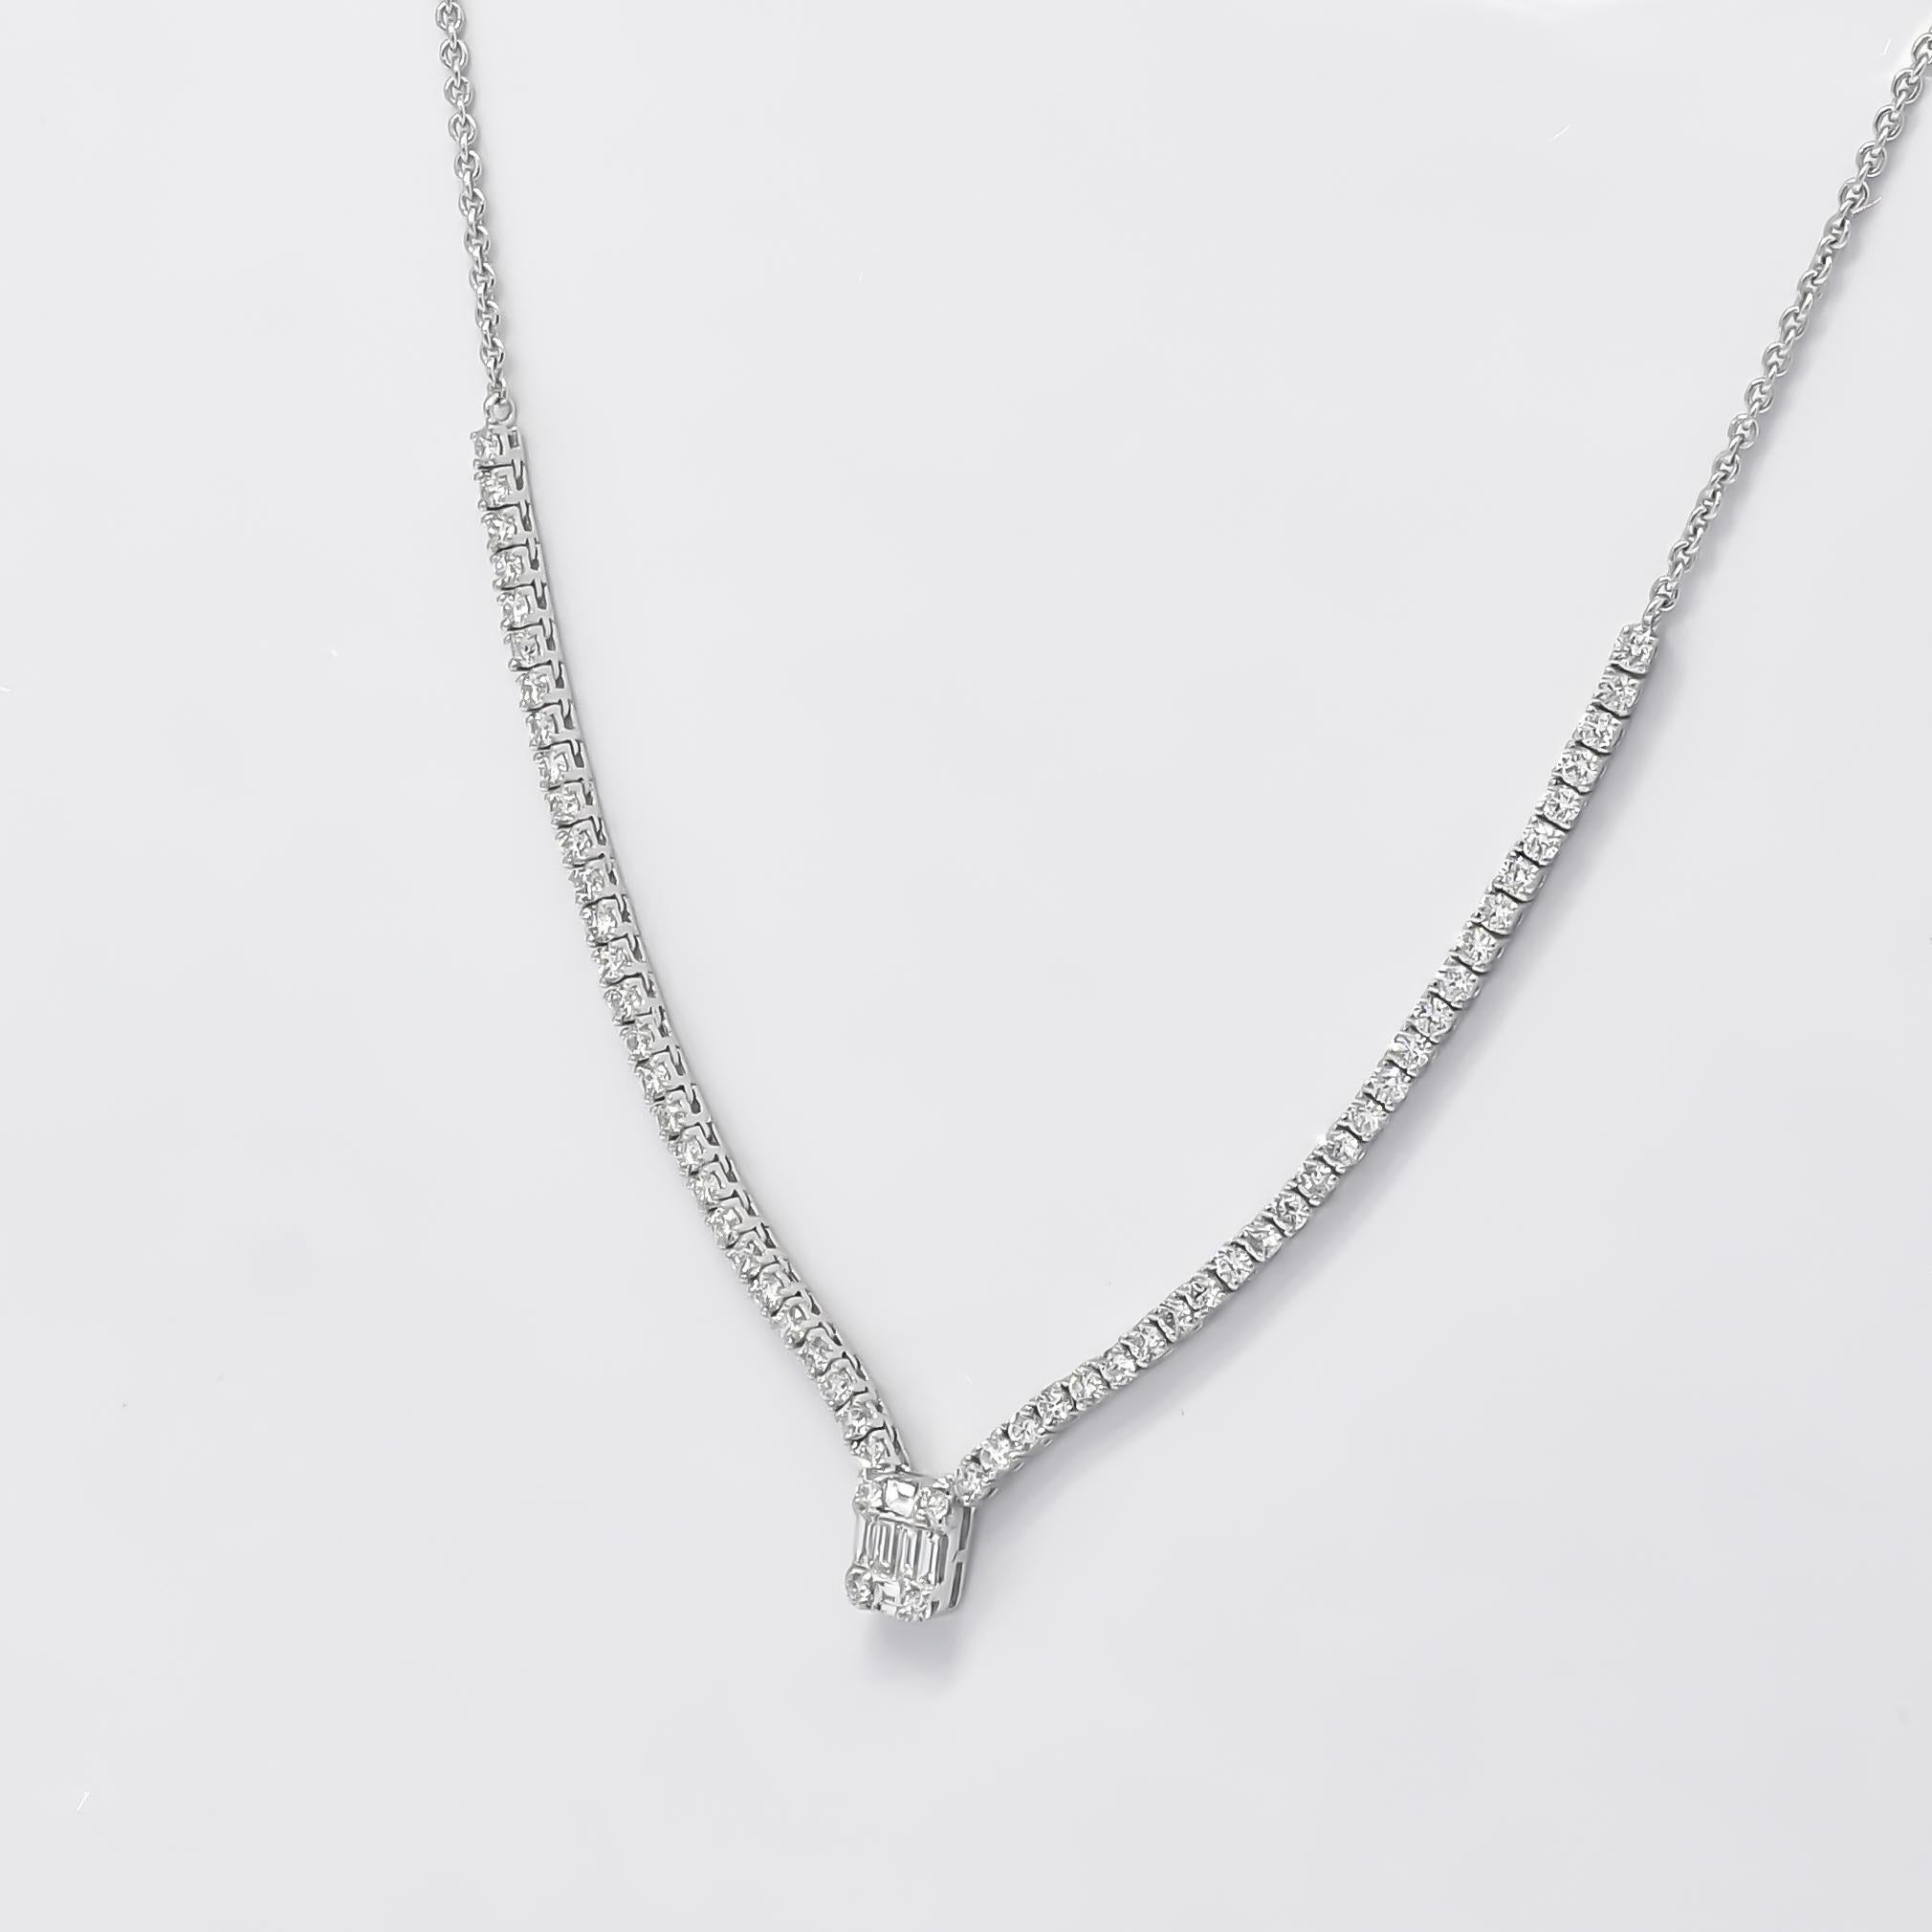 This Natural Diamonds Necklace is a true masterpiece that embodies modern elegance and sophistication. Crafted in 18 karat white gold, this single-row necklace is a testament to the beauty and allure of diamonds, featuring an impressive 1.64 carats